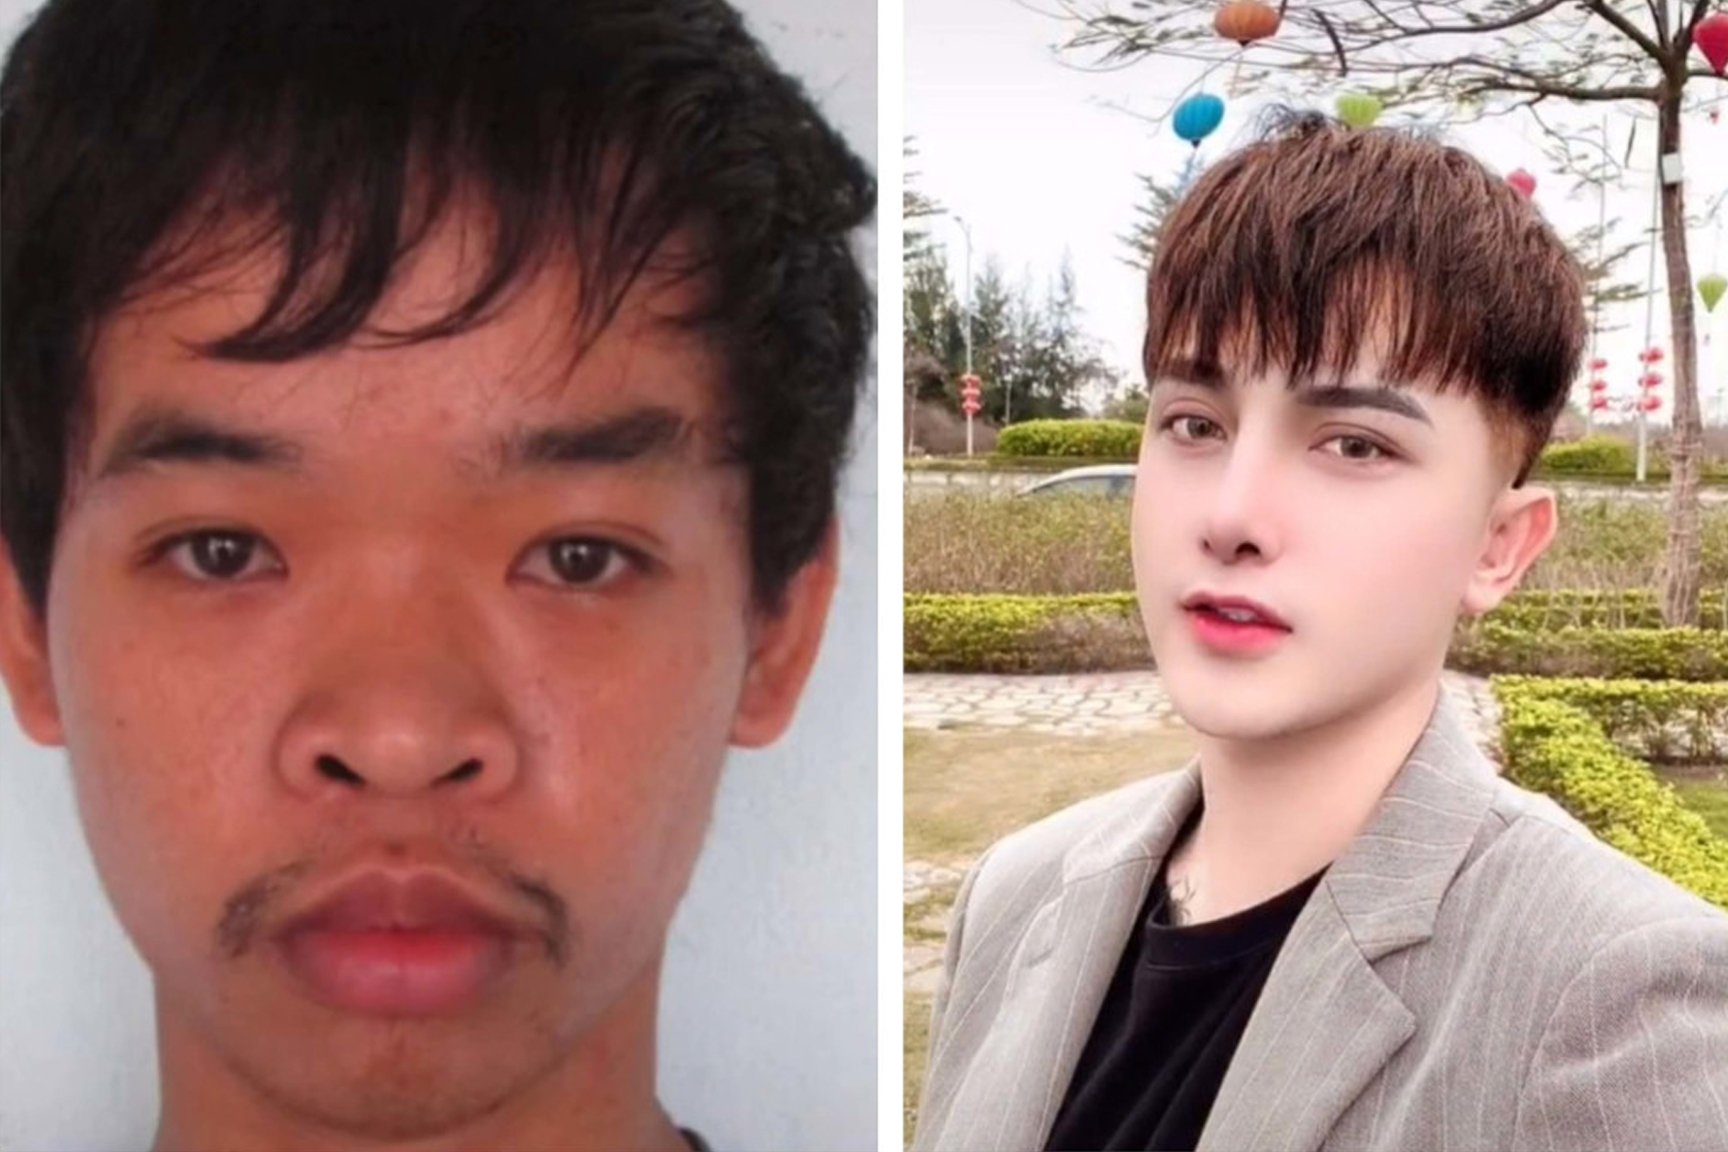 Vietnamese man gets numerous plastic surgeries to look like a K. www.allkpo...